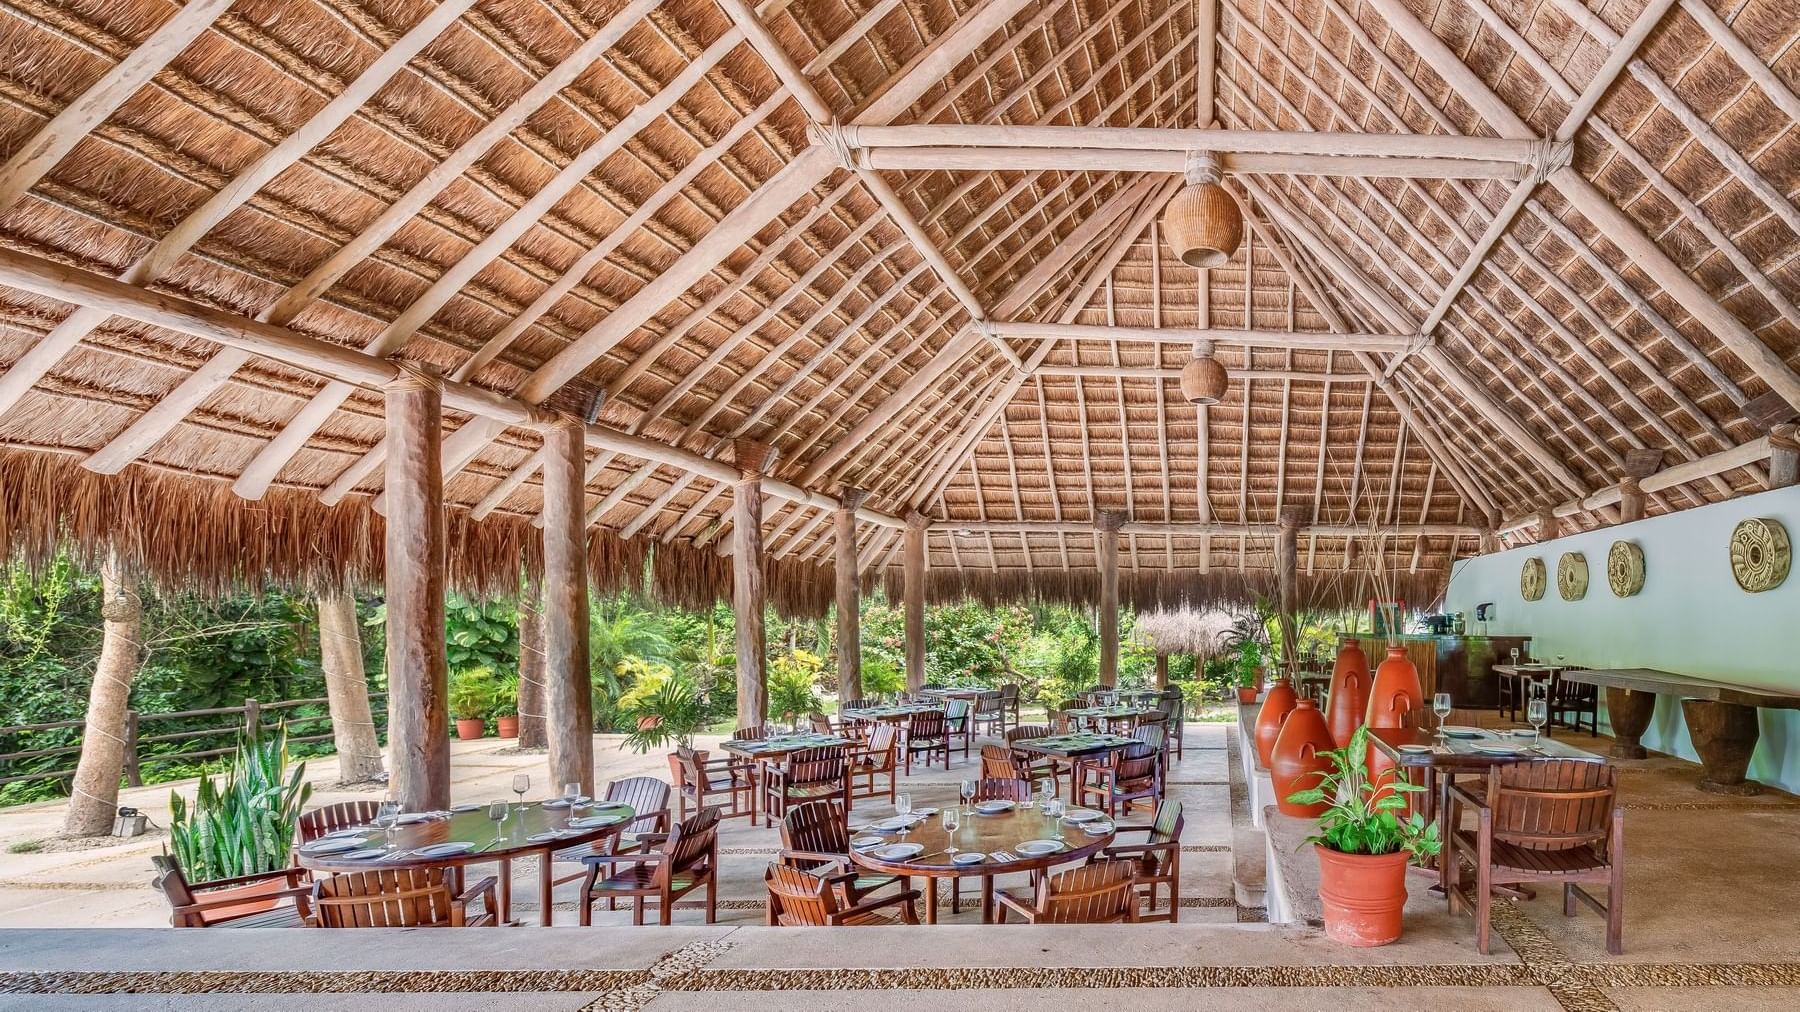 Dining table arrangement in La Palapa at The Explorean Kohunlich